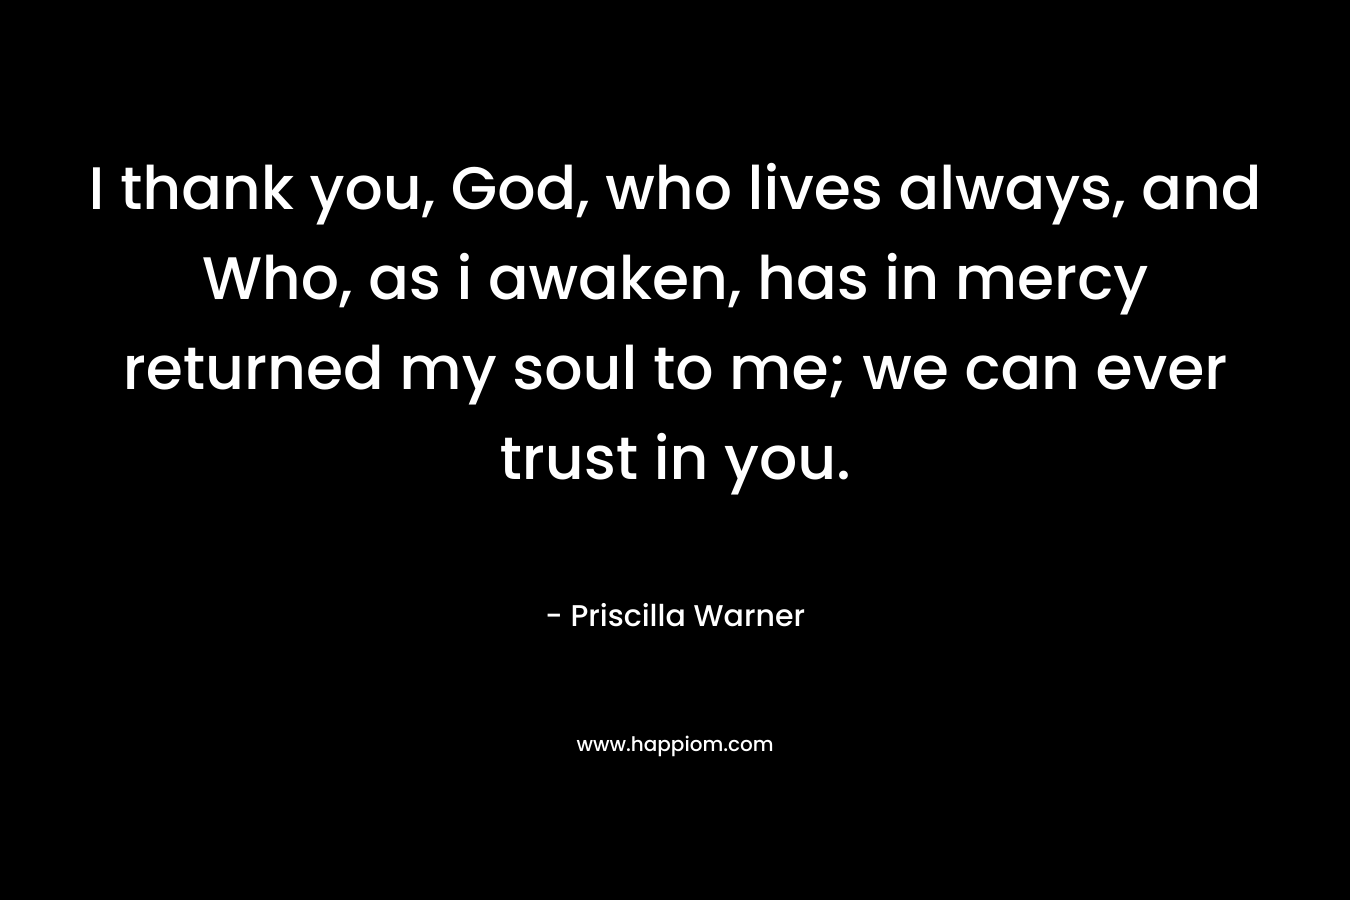 I thank you, God, who lives always, and Who, as i awaken, has in mercy returned my soul to me; we can ever trust in you. – Priscilla Warner